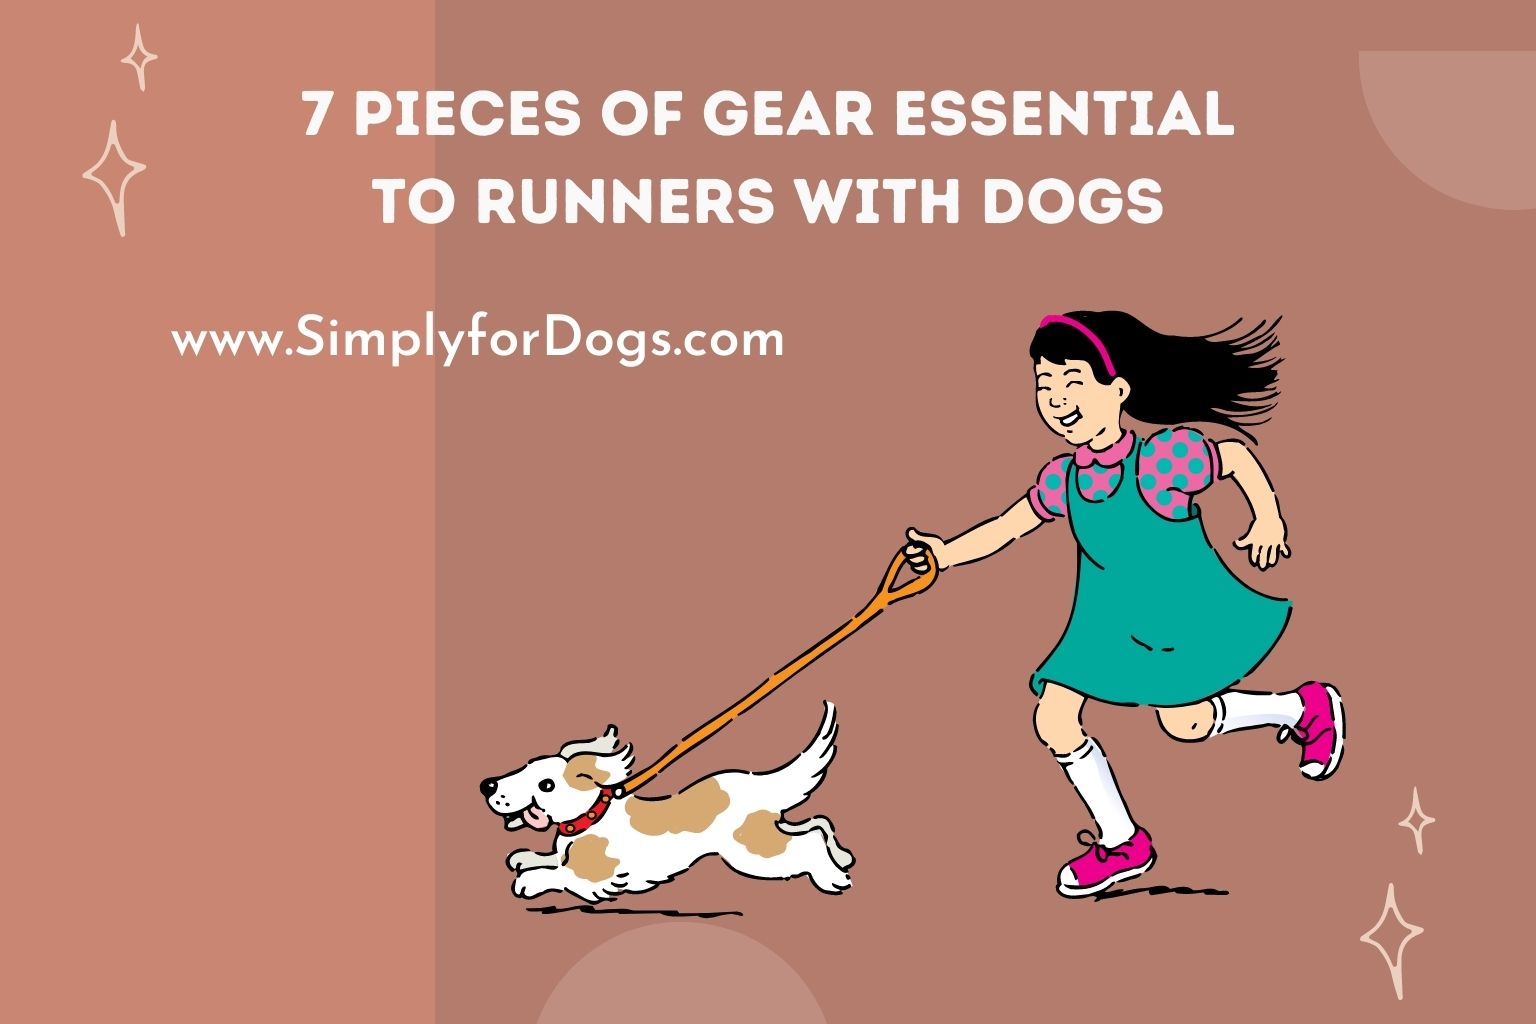 7 Pieces of Gear Essential to Runners with Dogs